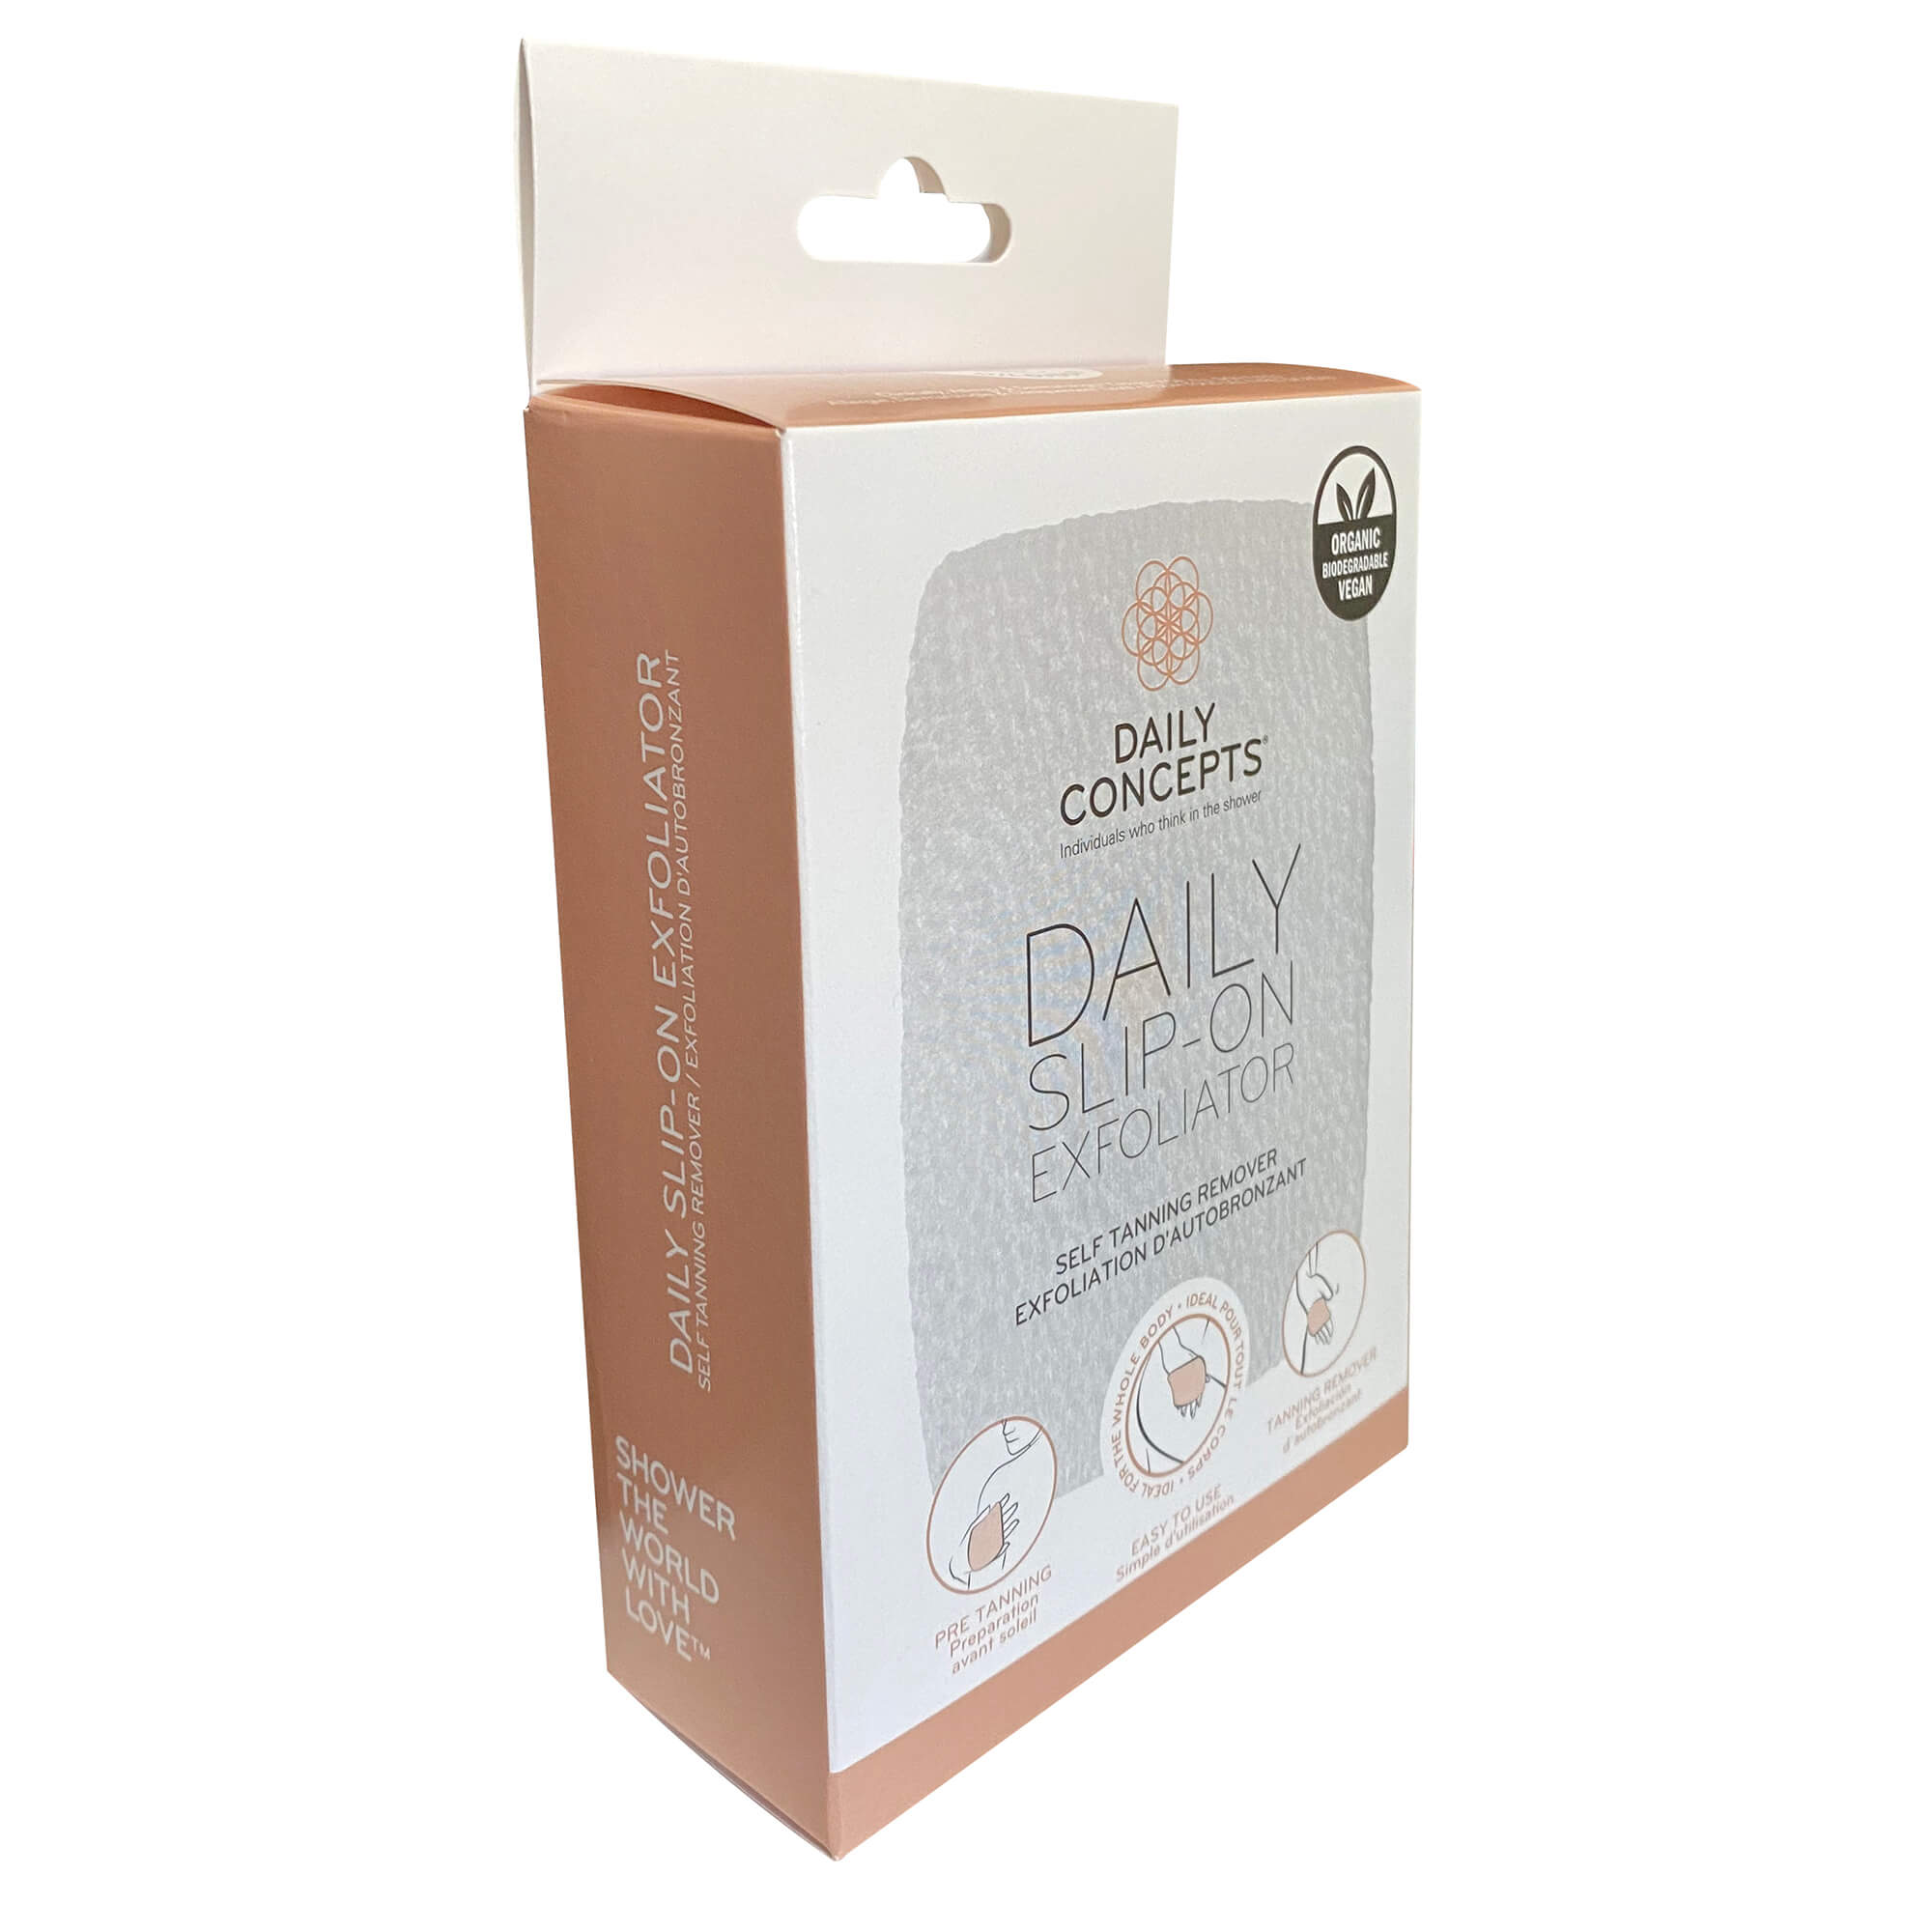 Daily Dual Foot Scrubber by Daily Concepts luxury bath and spa tools –  DAILY CONCEPTS